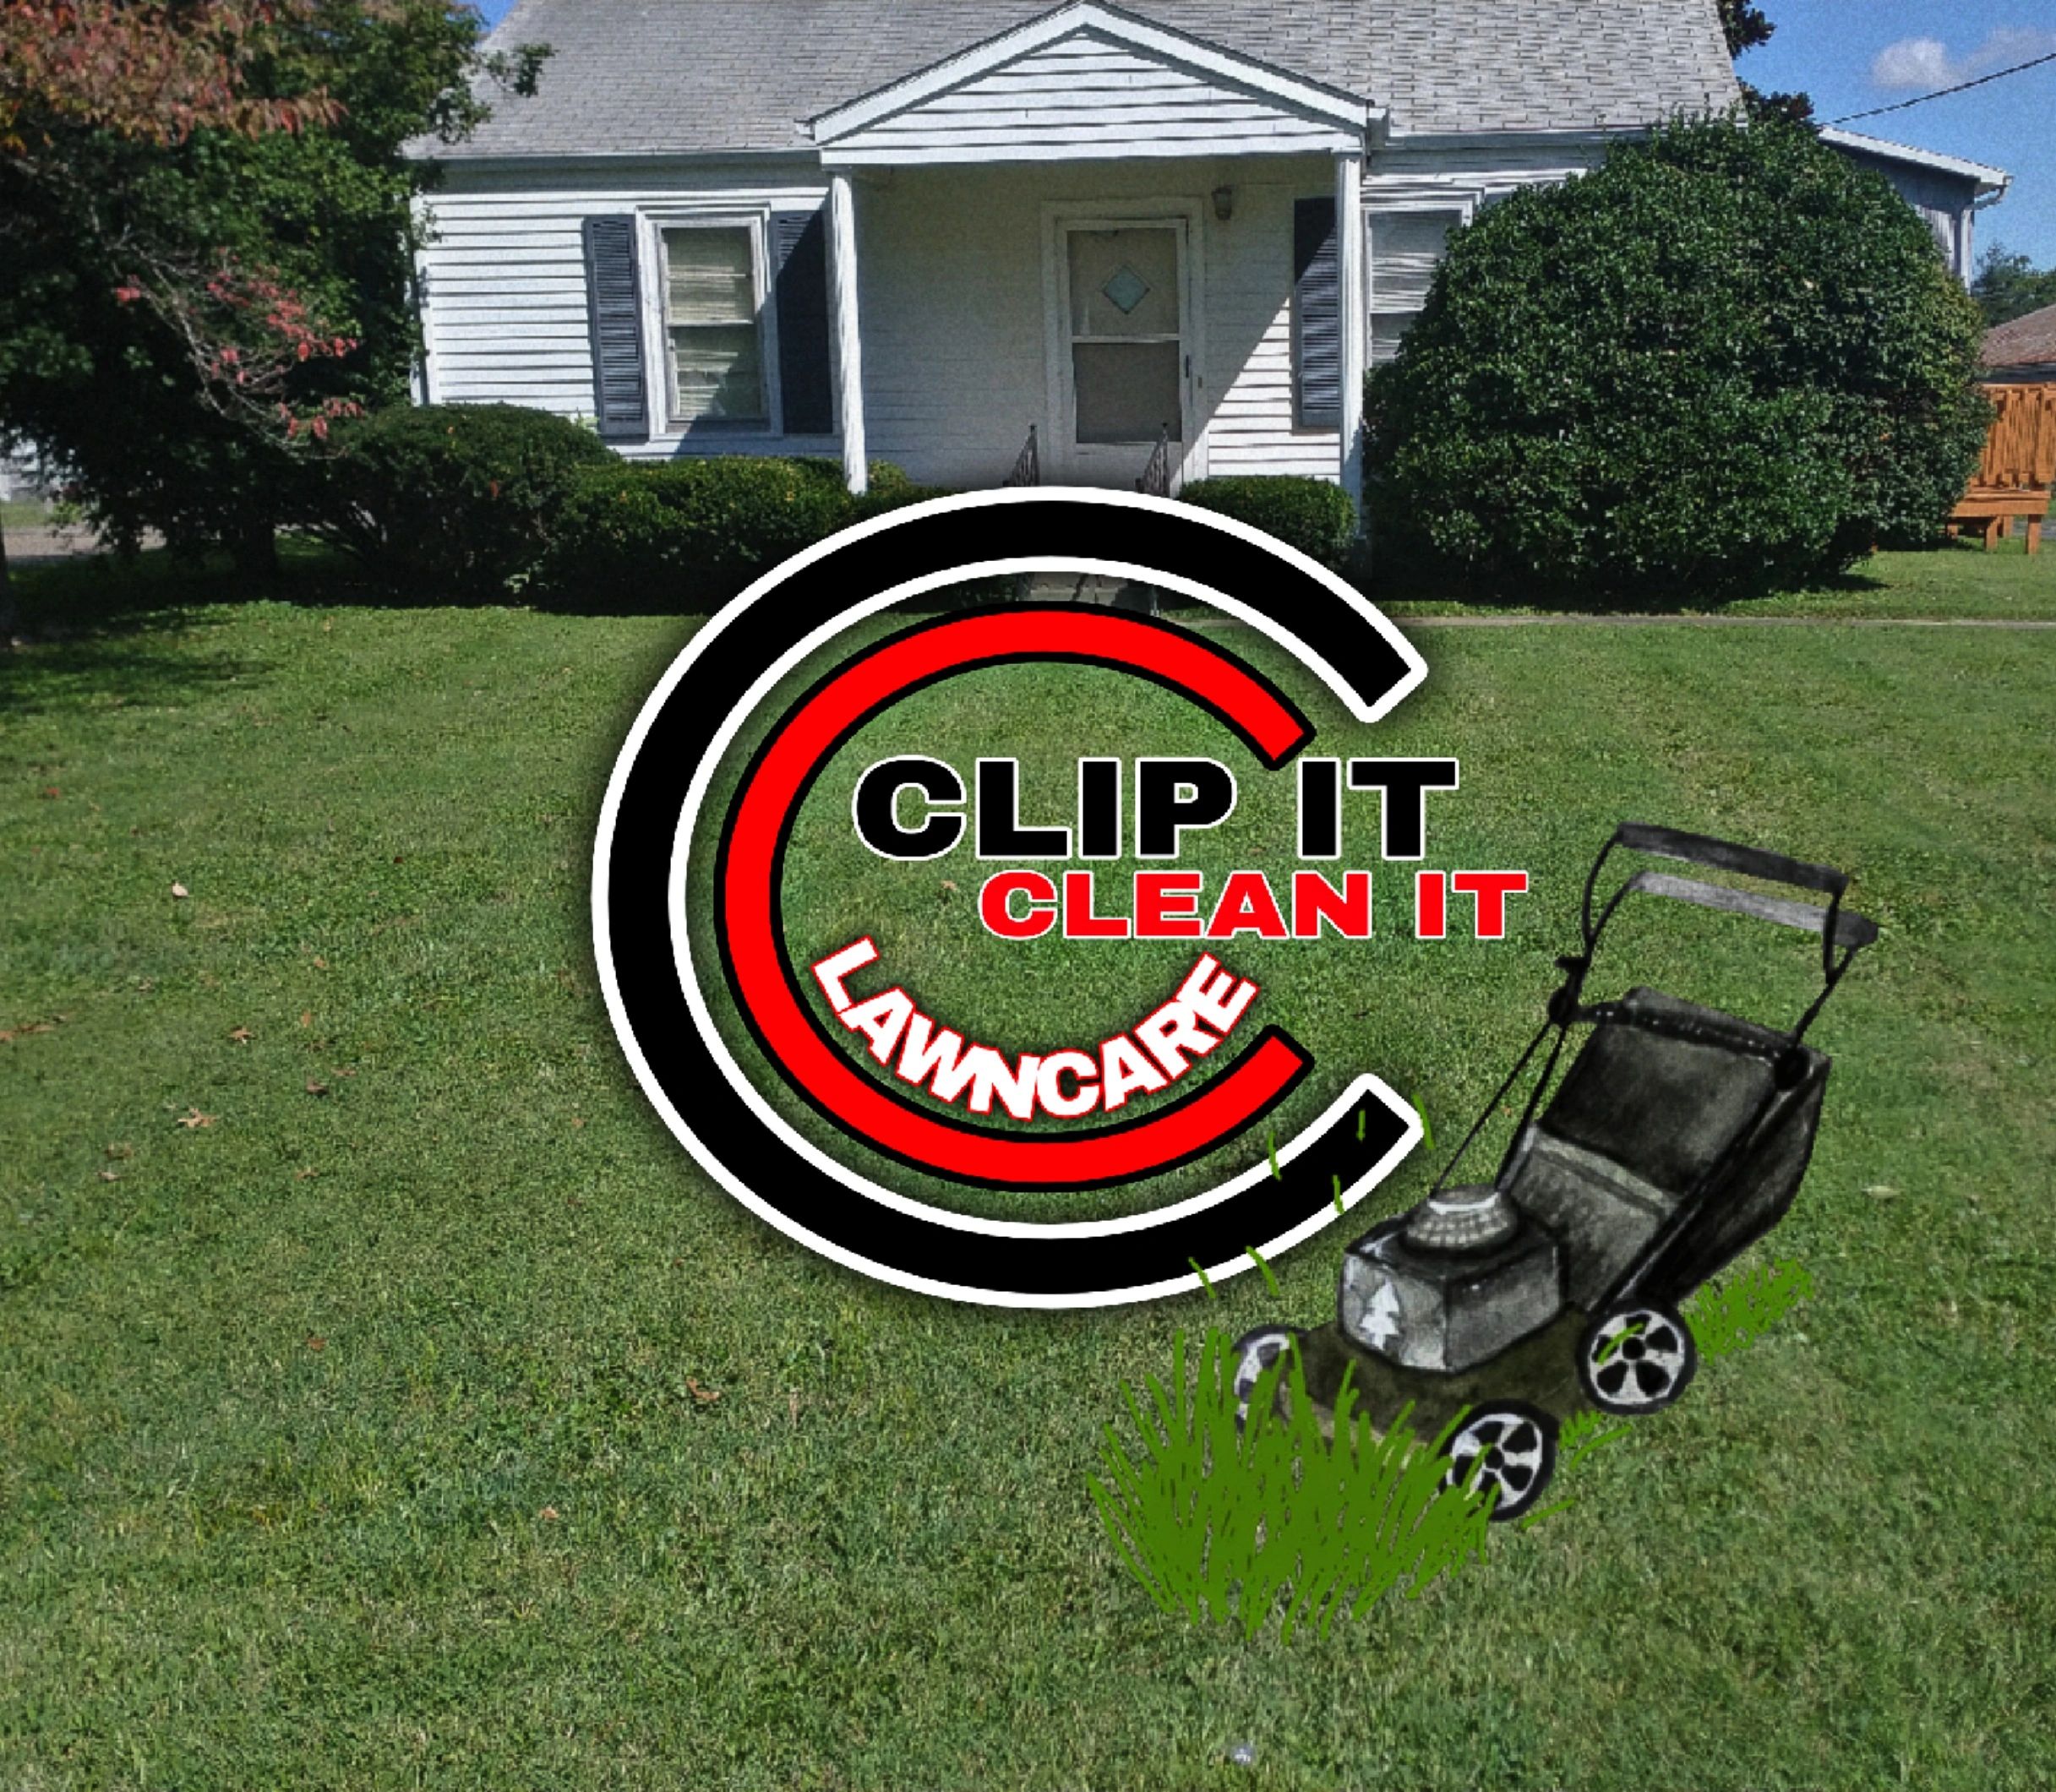 CLIP IT CLEAN IT LAWN CARE is the best lawn care service in LOUISVILLE KENTUCKY, SOUTHERN 